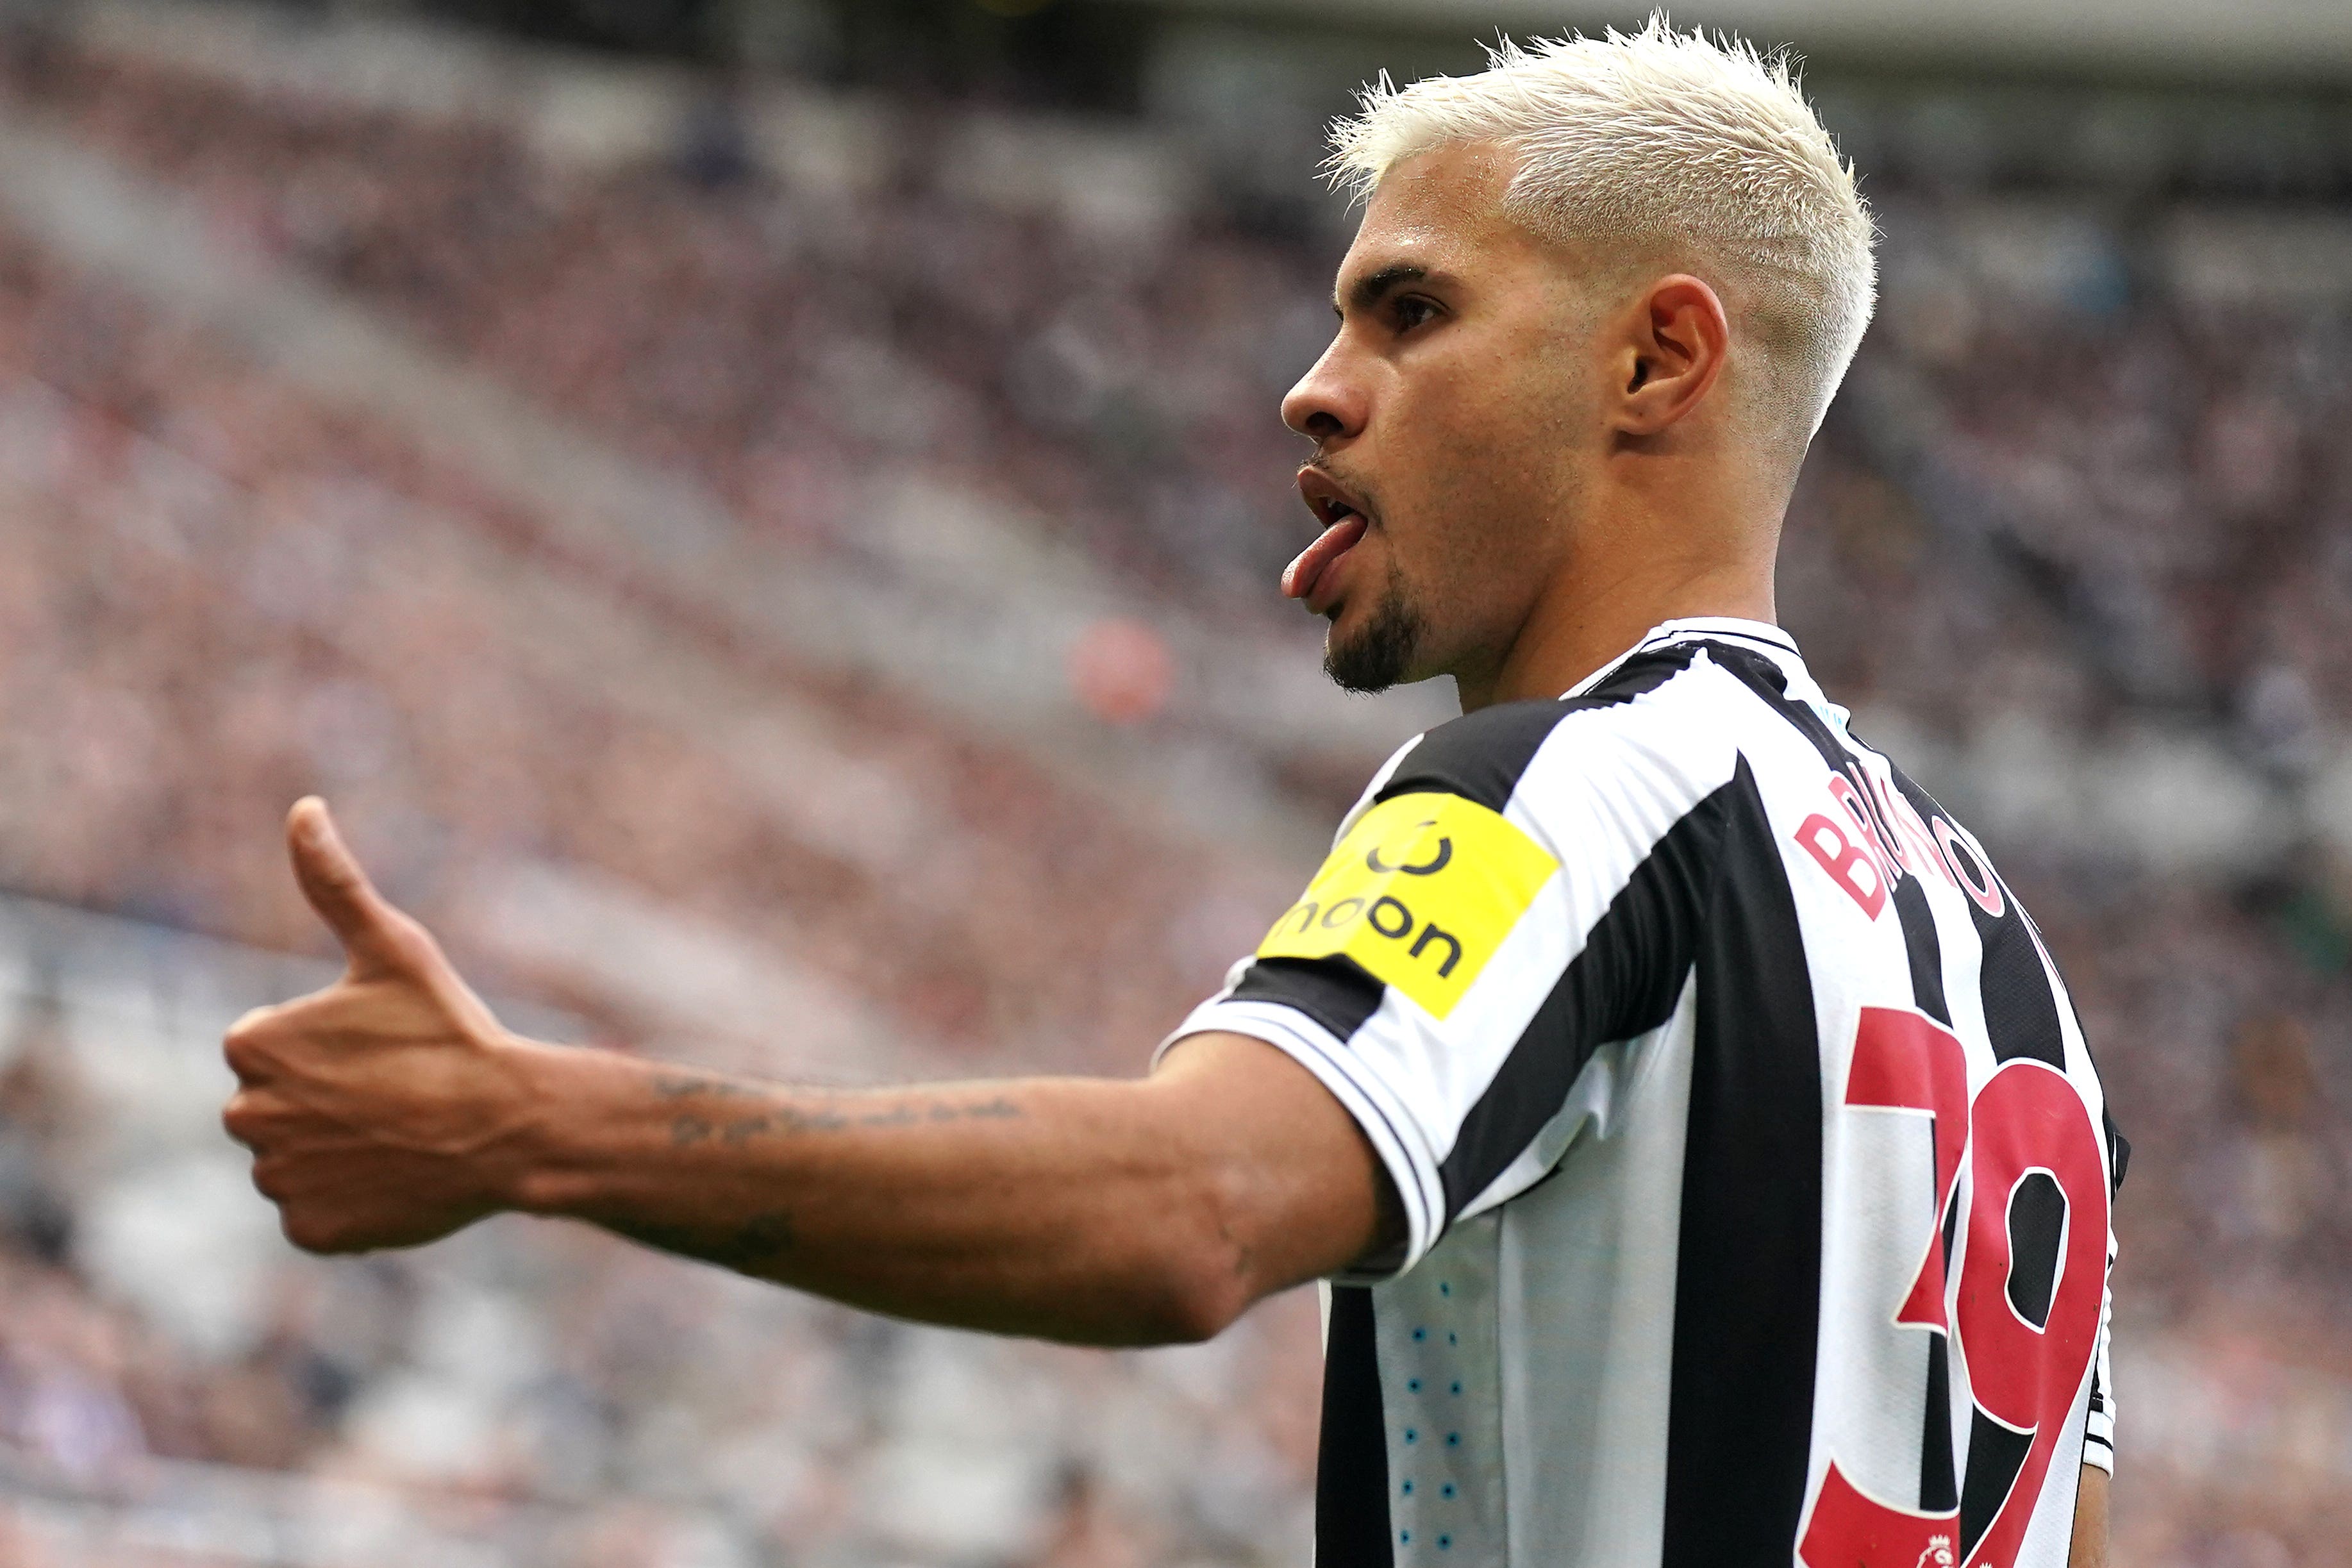 Newcastle’s Bruno Guimaraes has been tipped to make at impact at the World Cup in Qatar (Owen Humphreys/PA)